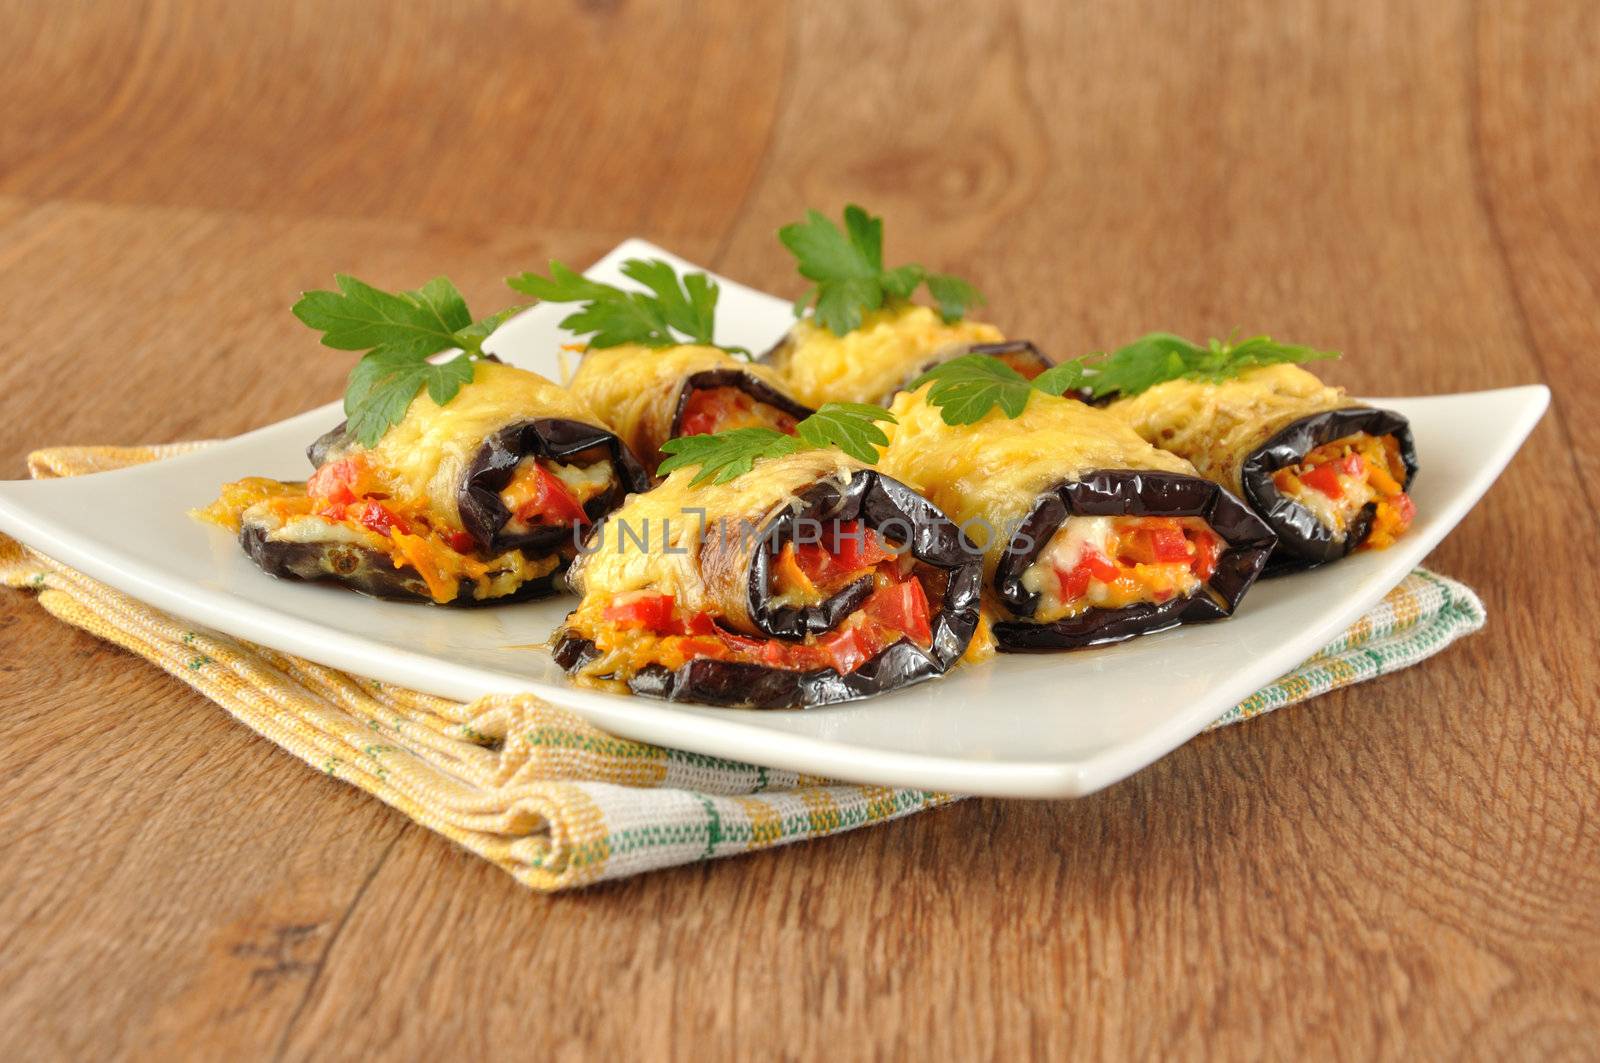 Eggplant rolls stuffed with cheese by Apolonia